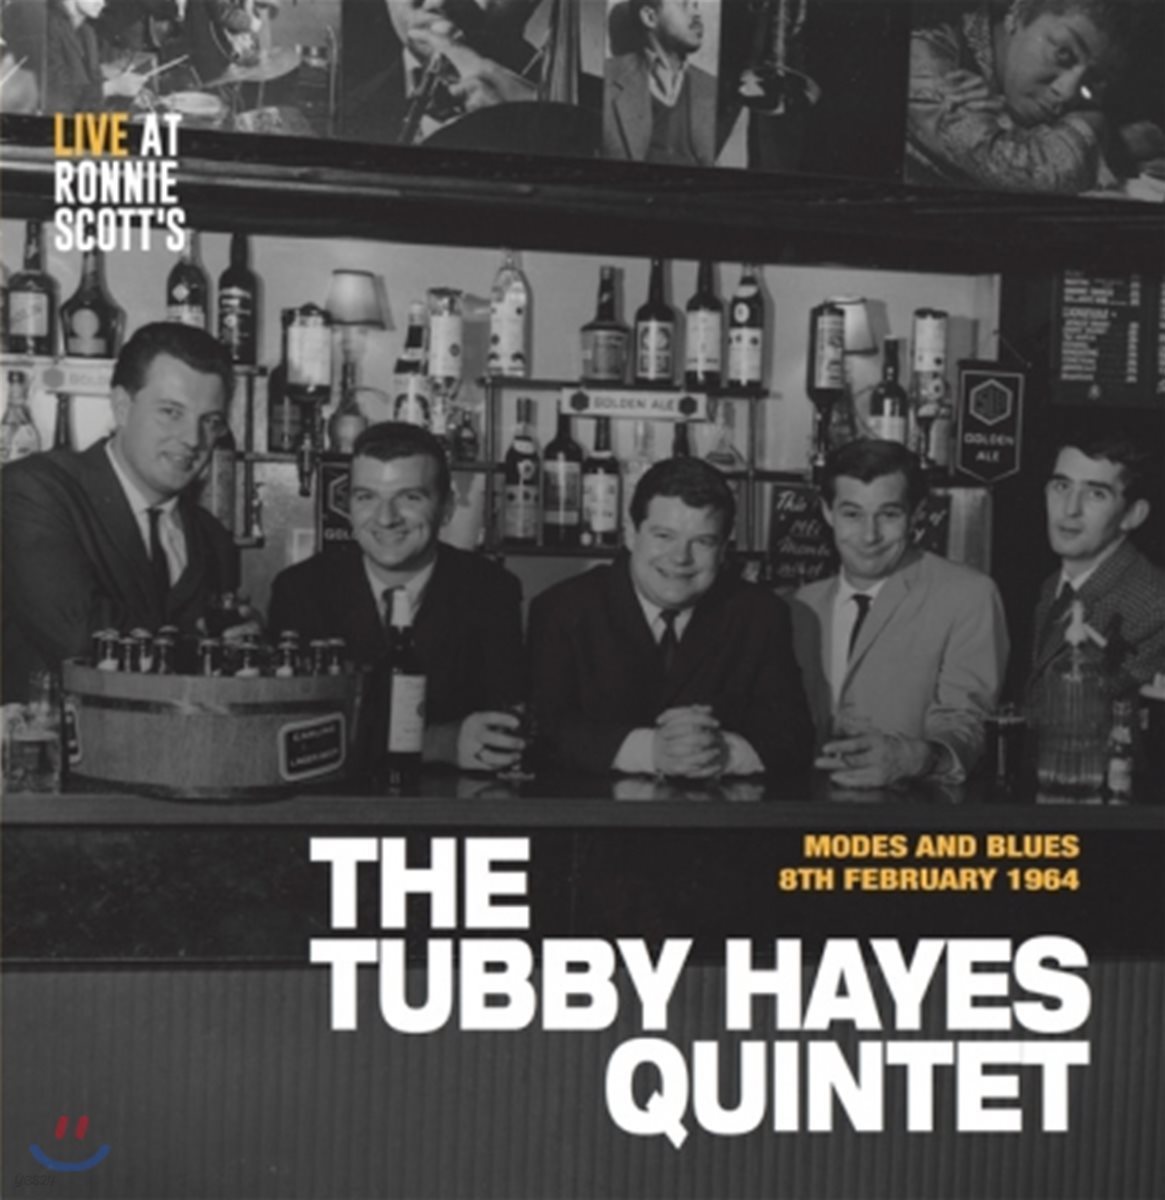 The Tubby Hayes Quintet (터비 헤이스 퀸텟) - Modes and Blues: 8th February 1964 Live At Ronnie Scott's [LP]